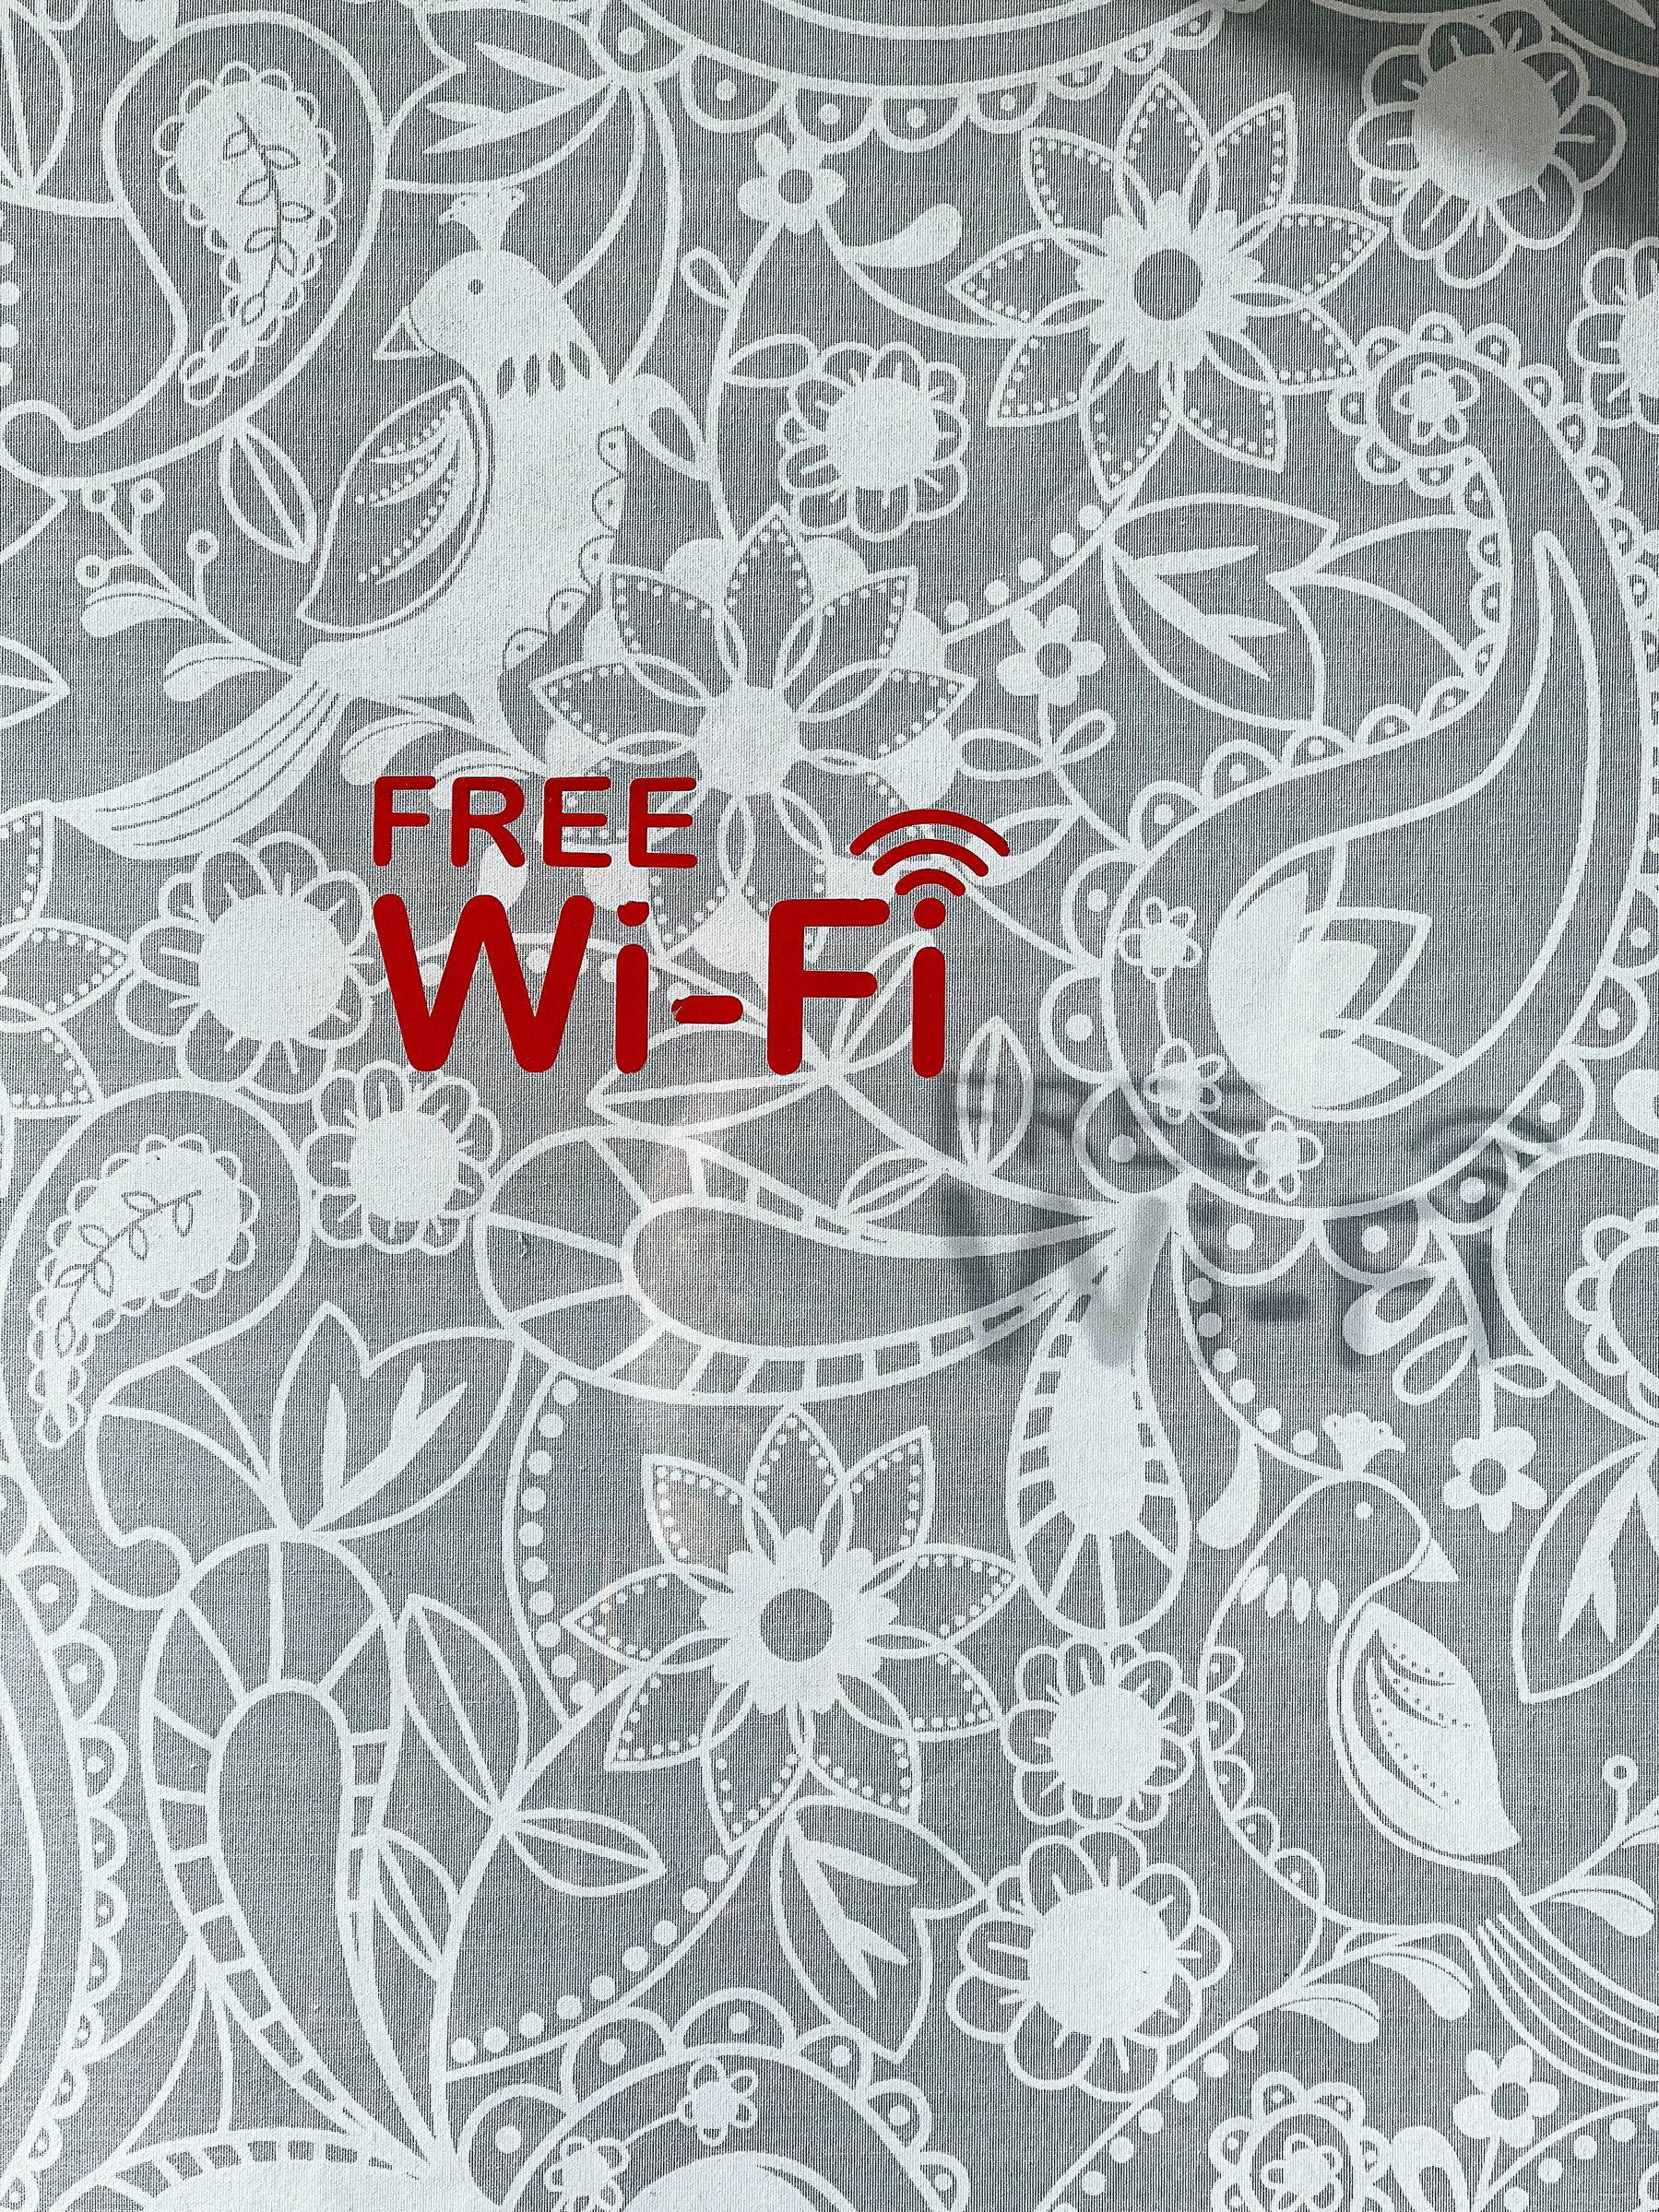 A patterned fabric background with &ldquo;FREE Wi-Fi&rdquo; text and Wi-Fi symbol superimposed in red.